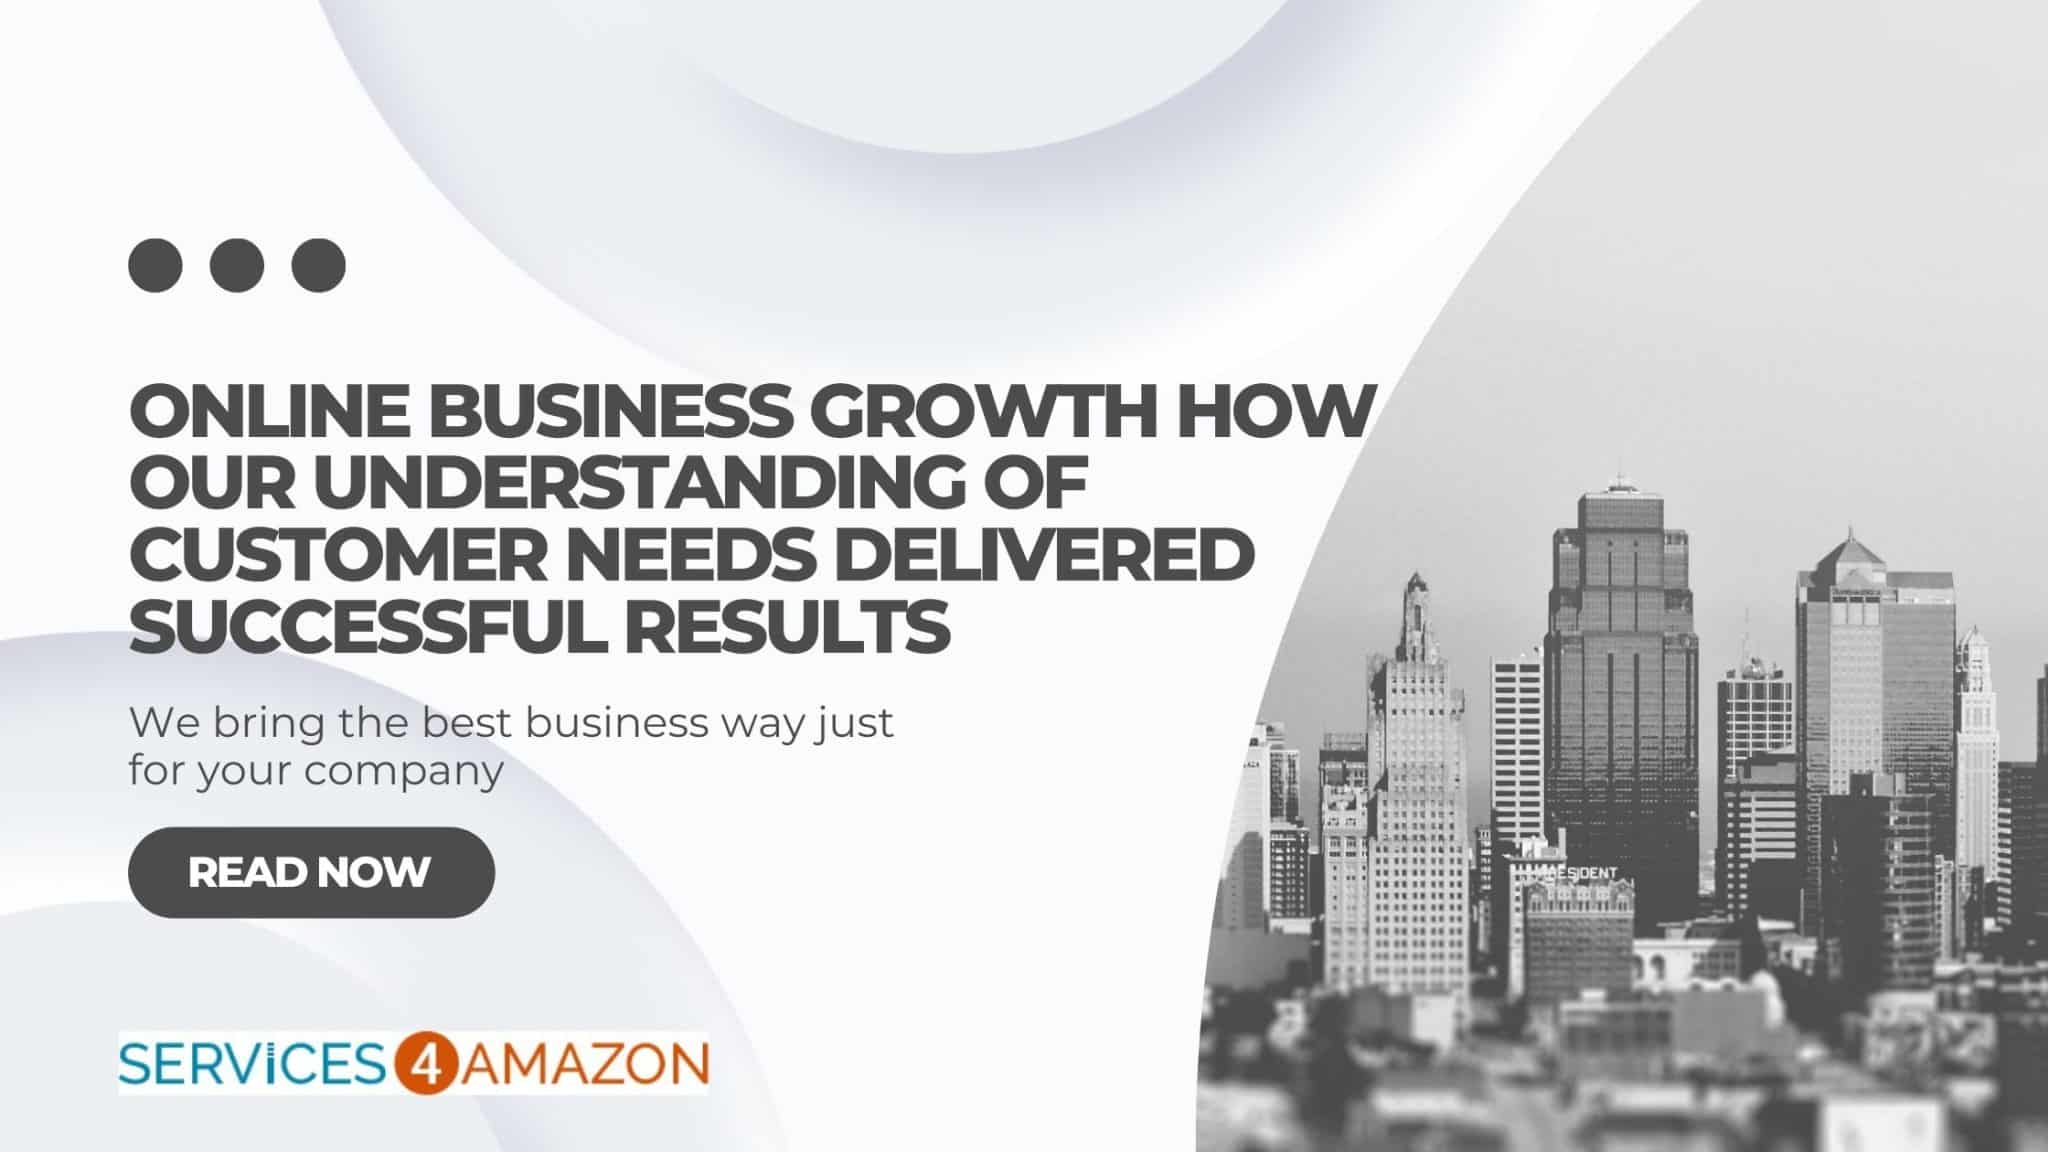 Online Business Growth How Our Understanding of Customer Needs Delivered Successful Results - Services4Amazon